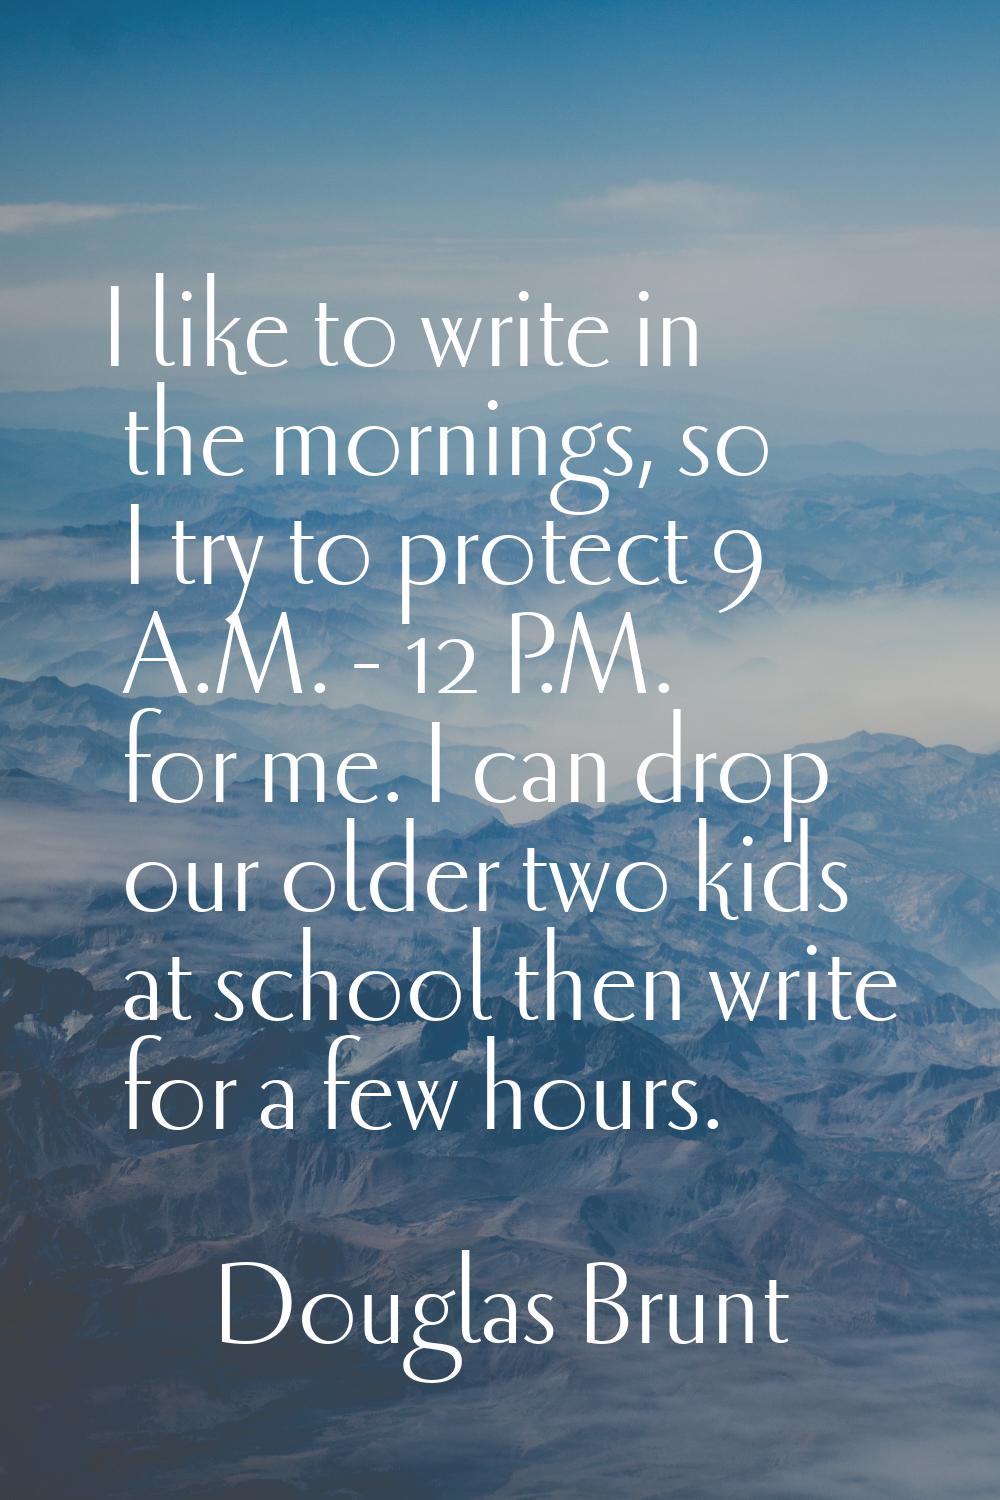 I like to write in the mornings, so I try to protect 9 A.M. - 12 P.M. for me. I can drop our older 